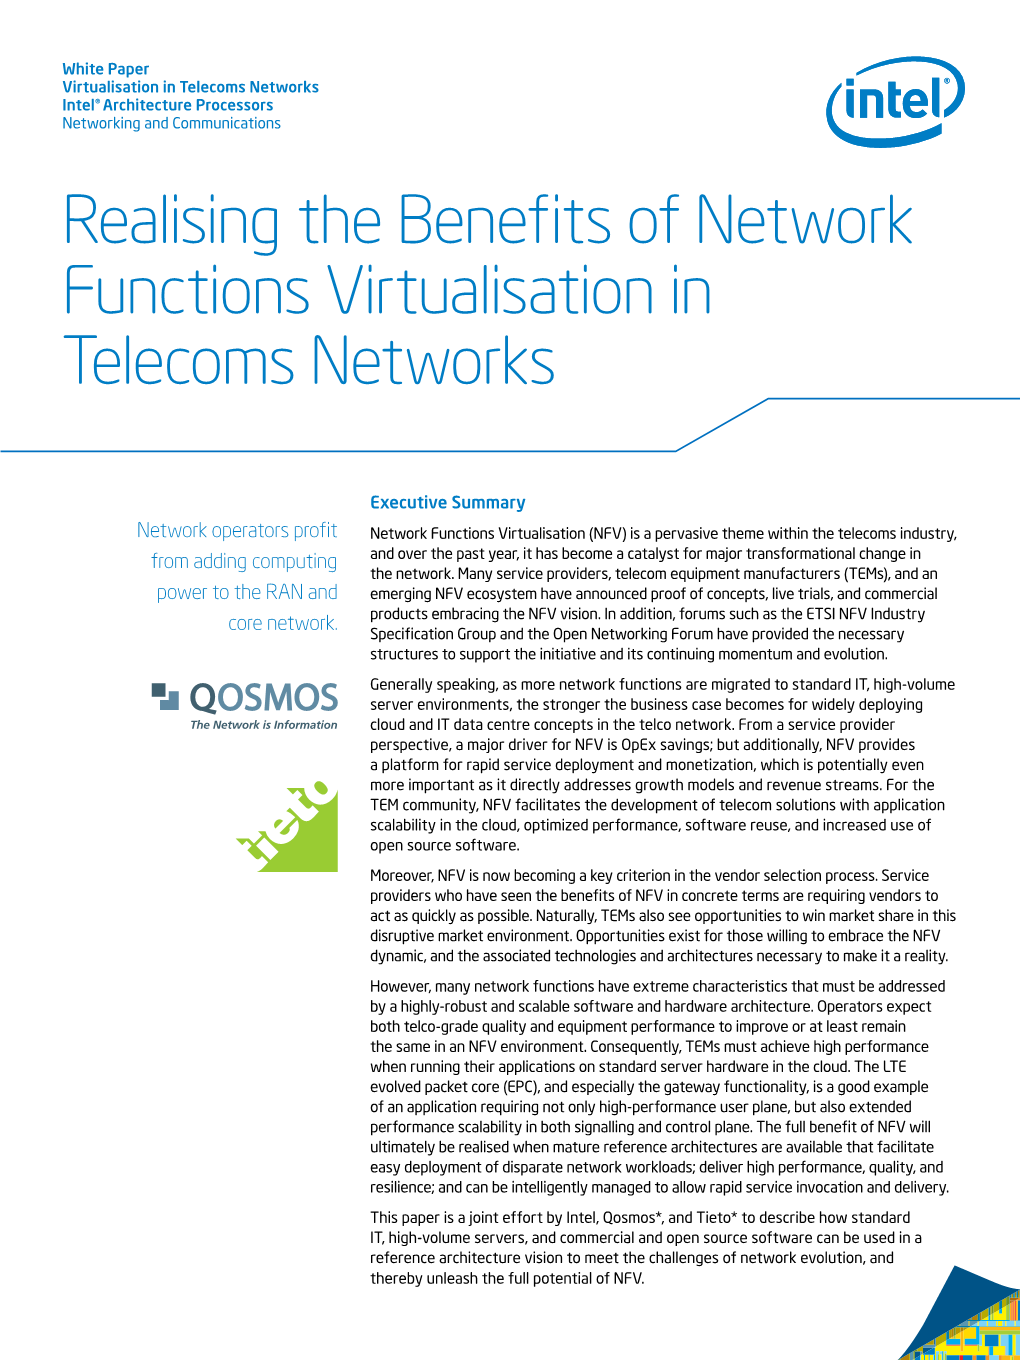 Realising the Benefits of Network Functions Virtualisation in Telecoms Networks